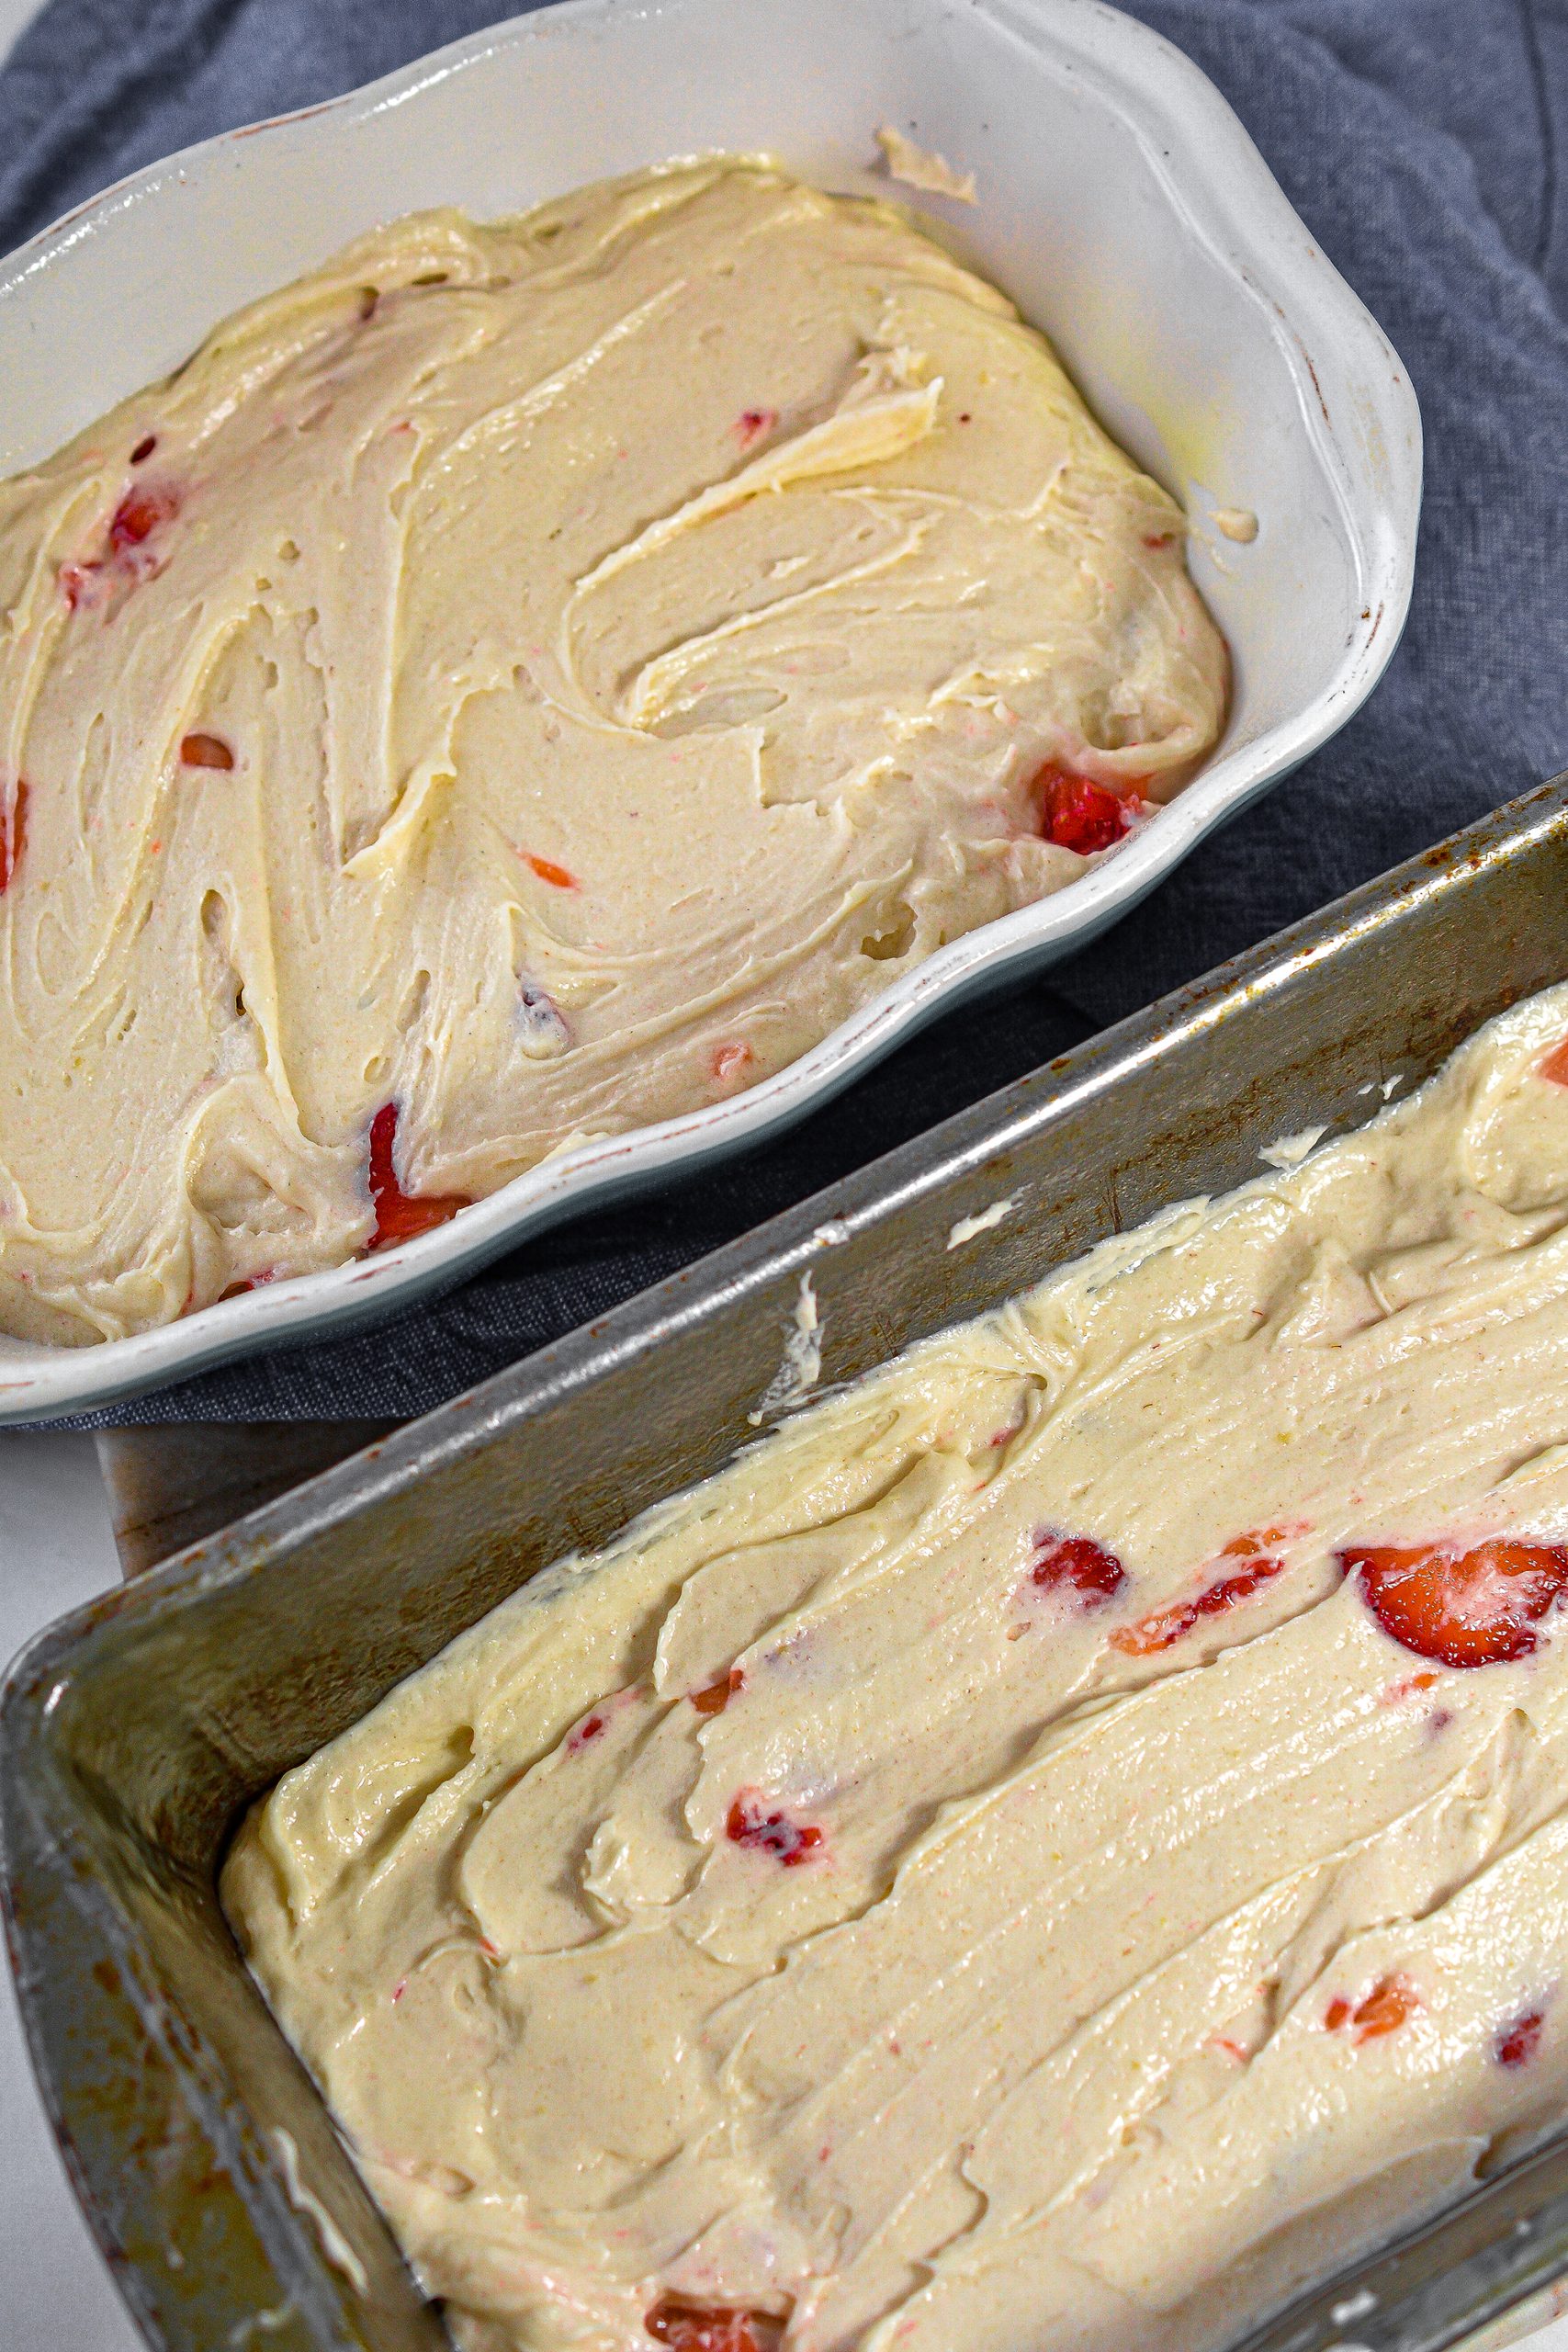 Spread the batter evenly between two well-greased loaf pans.